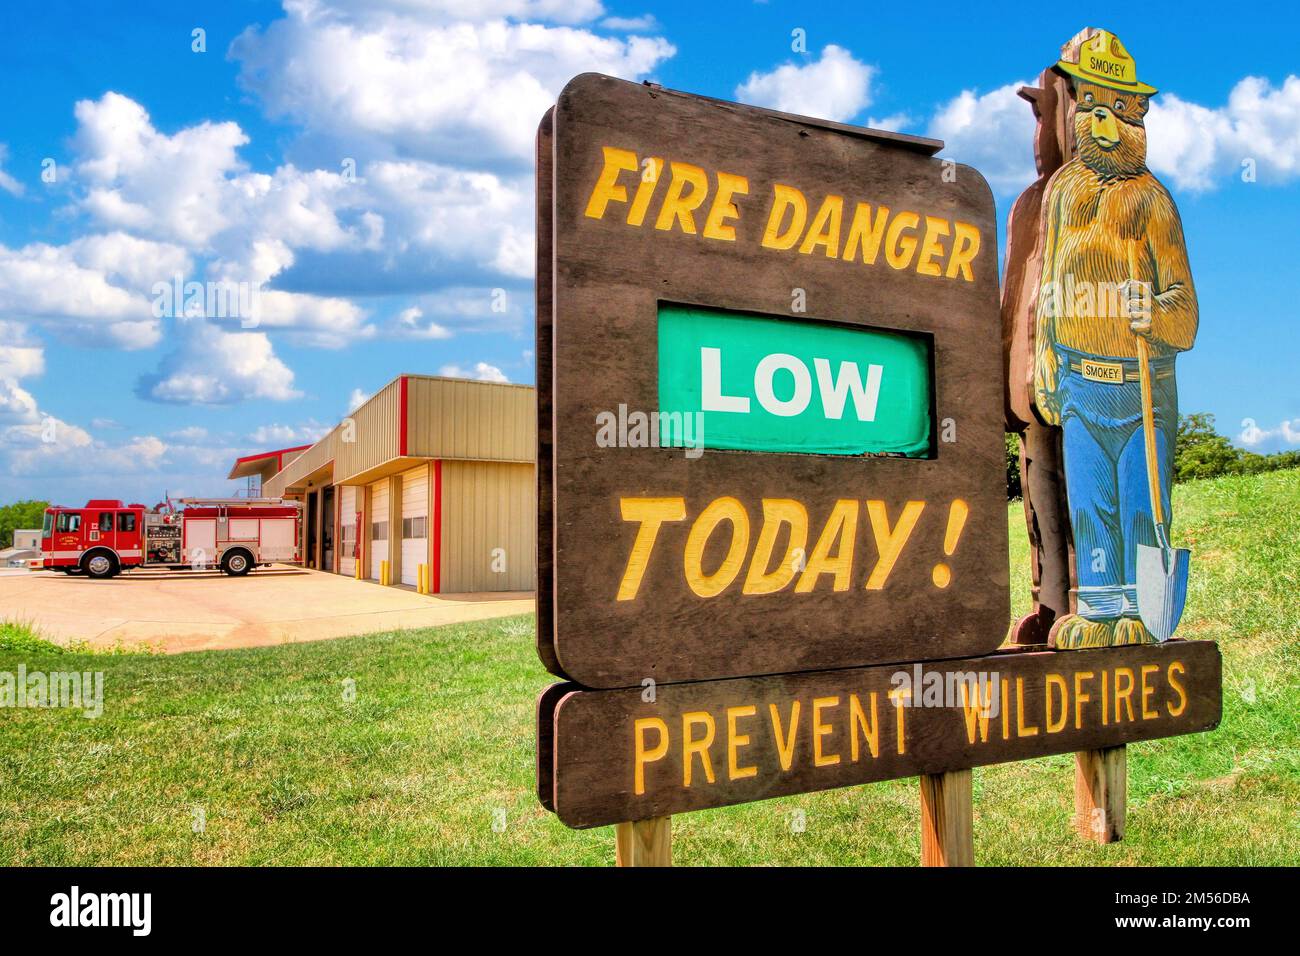 Chandler Oklahoma's Fire Department and EMS sits under a blue sky with white clouds with the Smokey Bear 'Fire Danger' wood sign in the foreground. Stock Photo